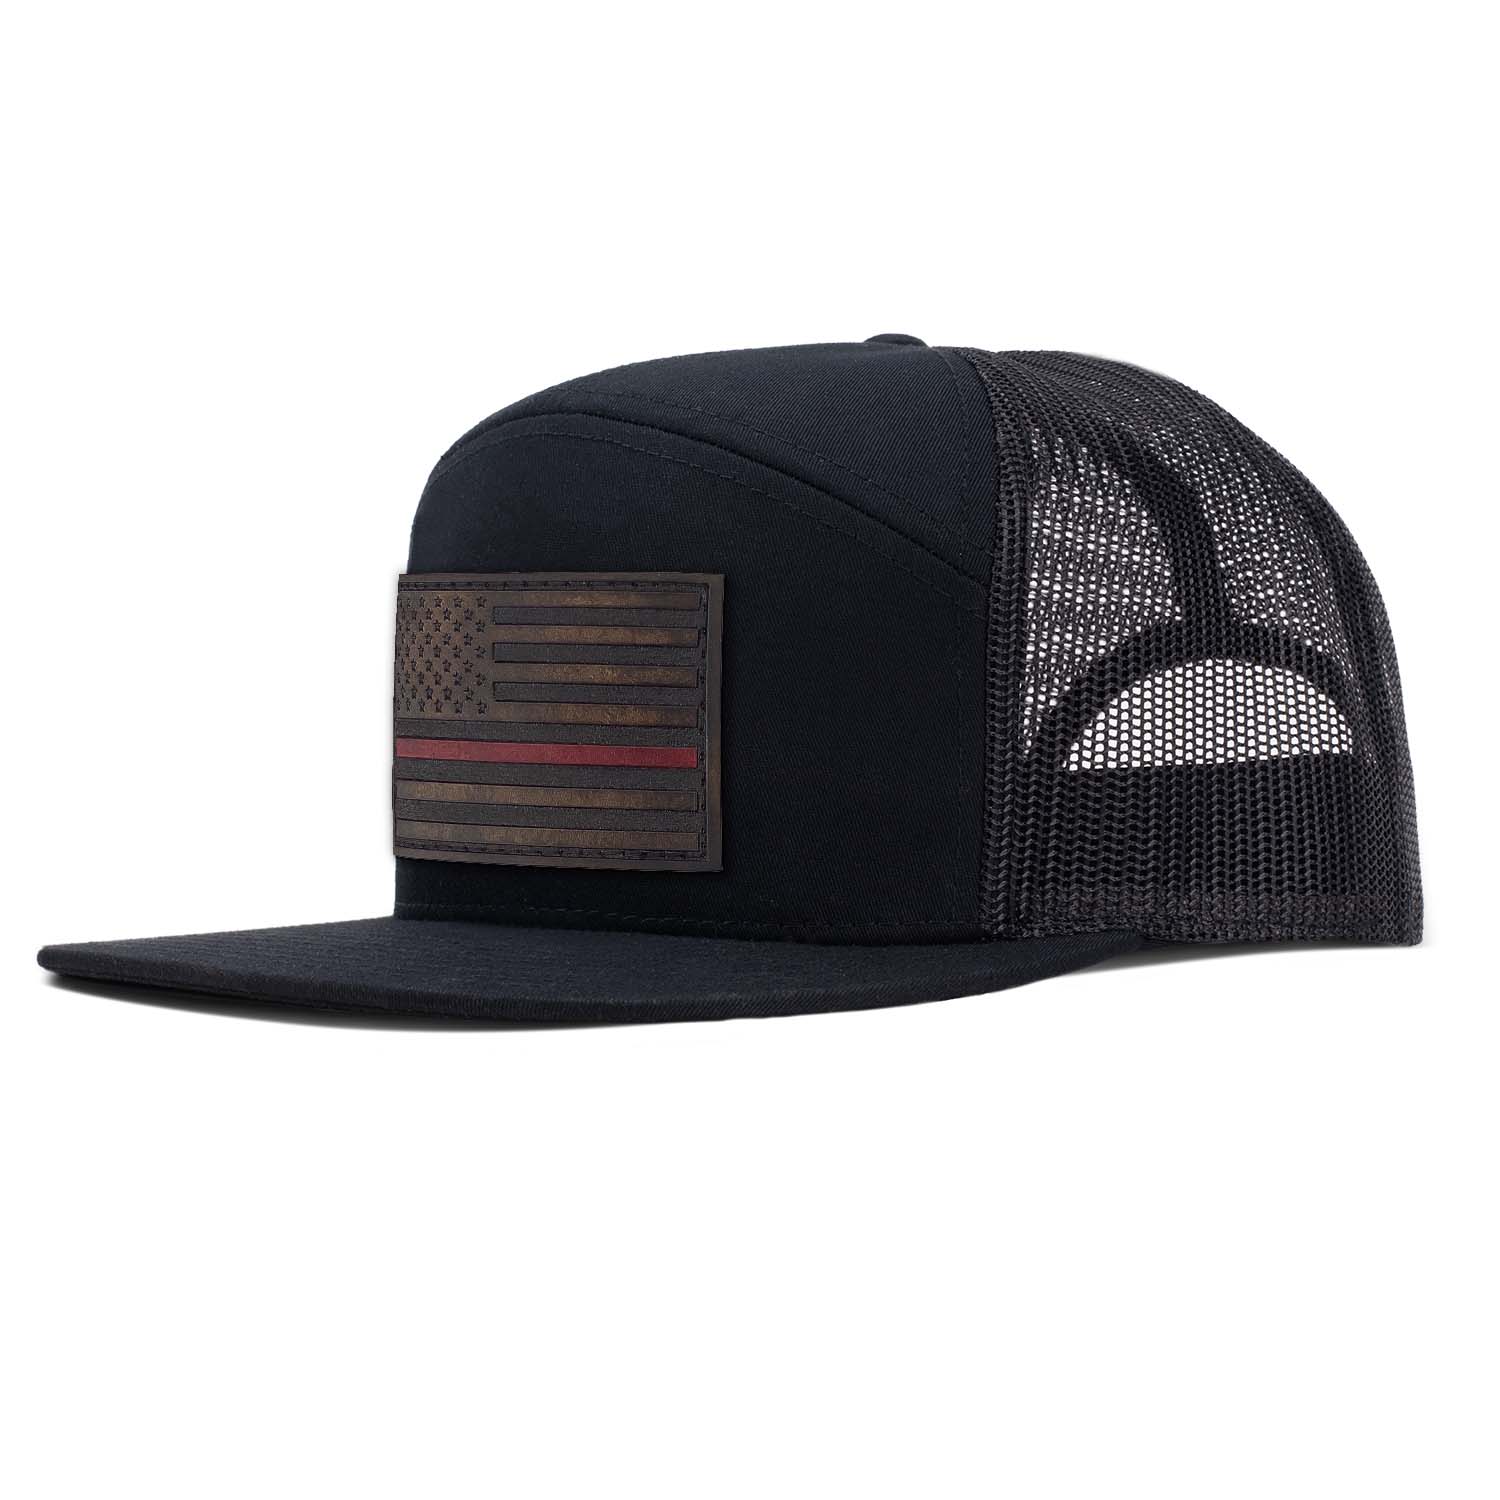 Revolution Mfg all black 7 panel trucker featuring a full grain leather American Flag Thin Red Line patch